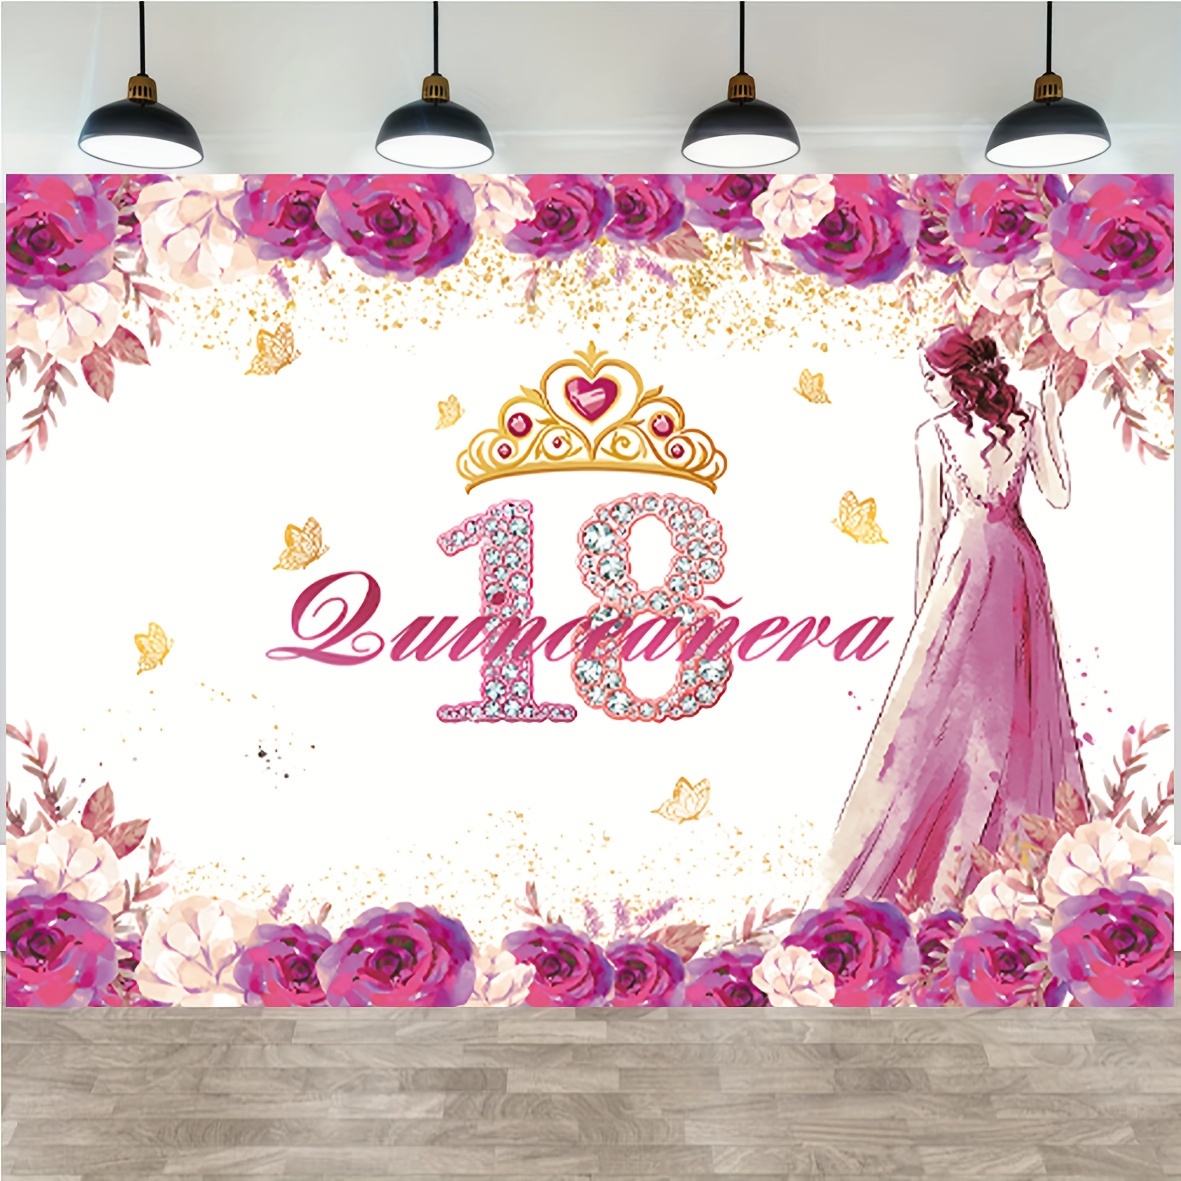 Quinceanera Decor Ideas and Photos - What To Buy - ShopWildThings